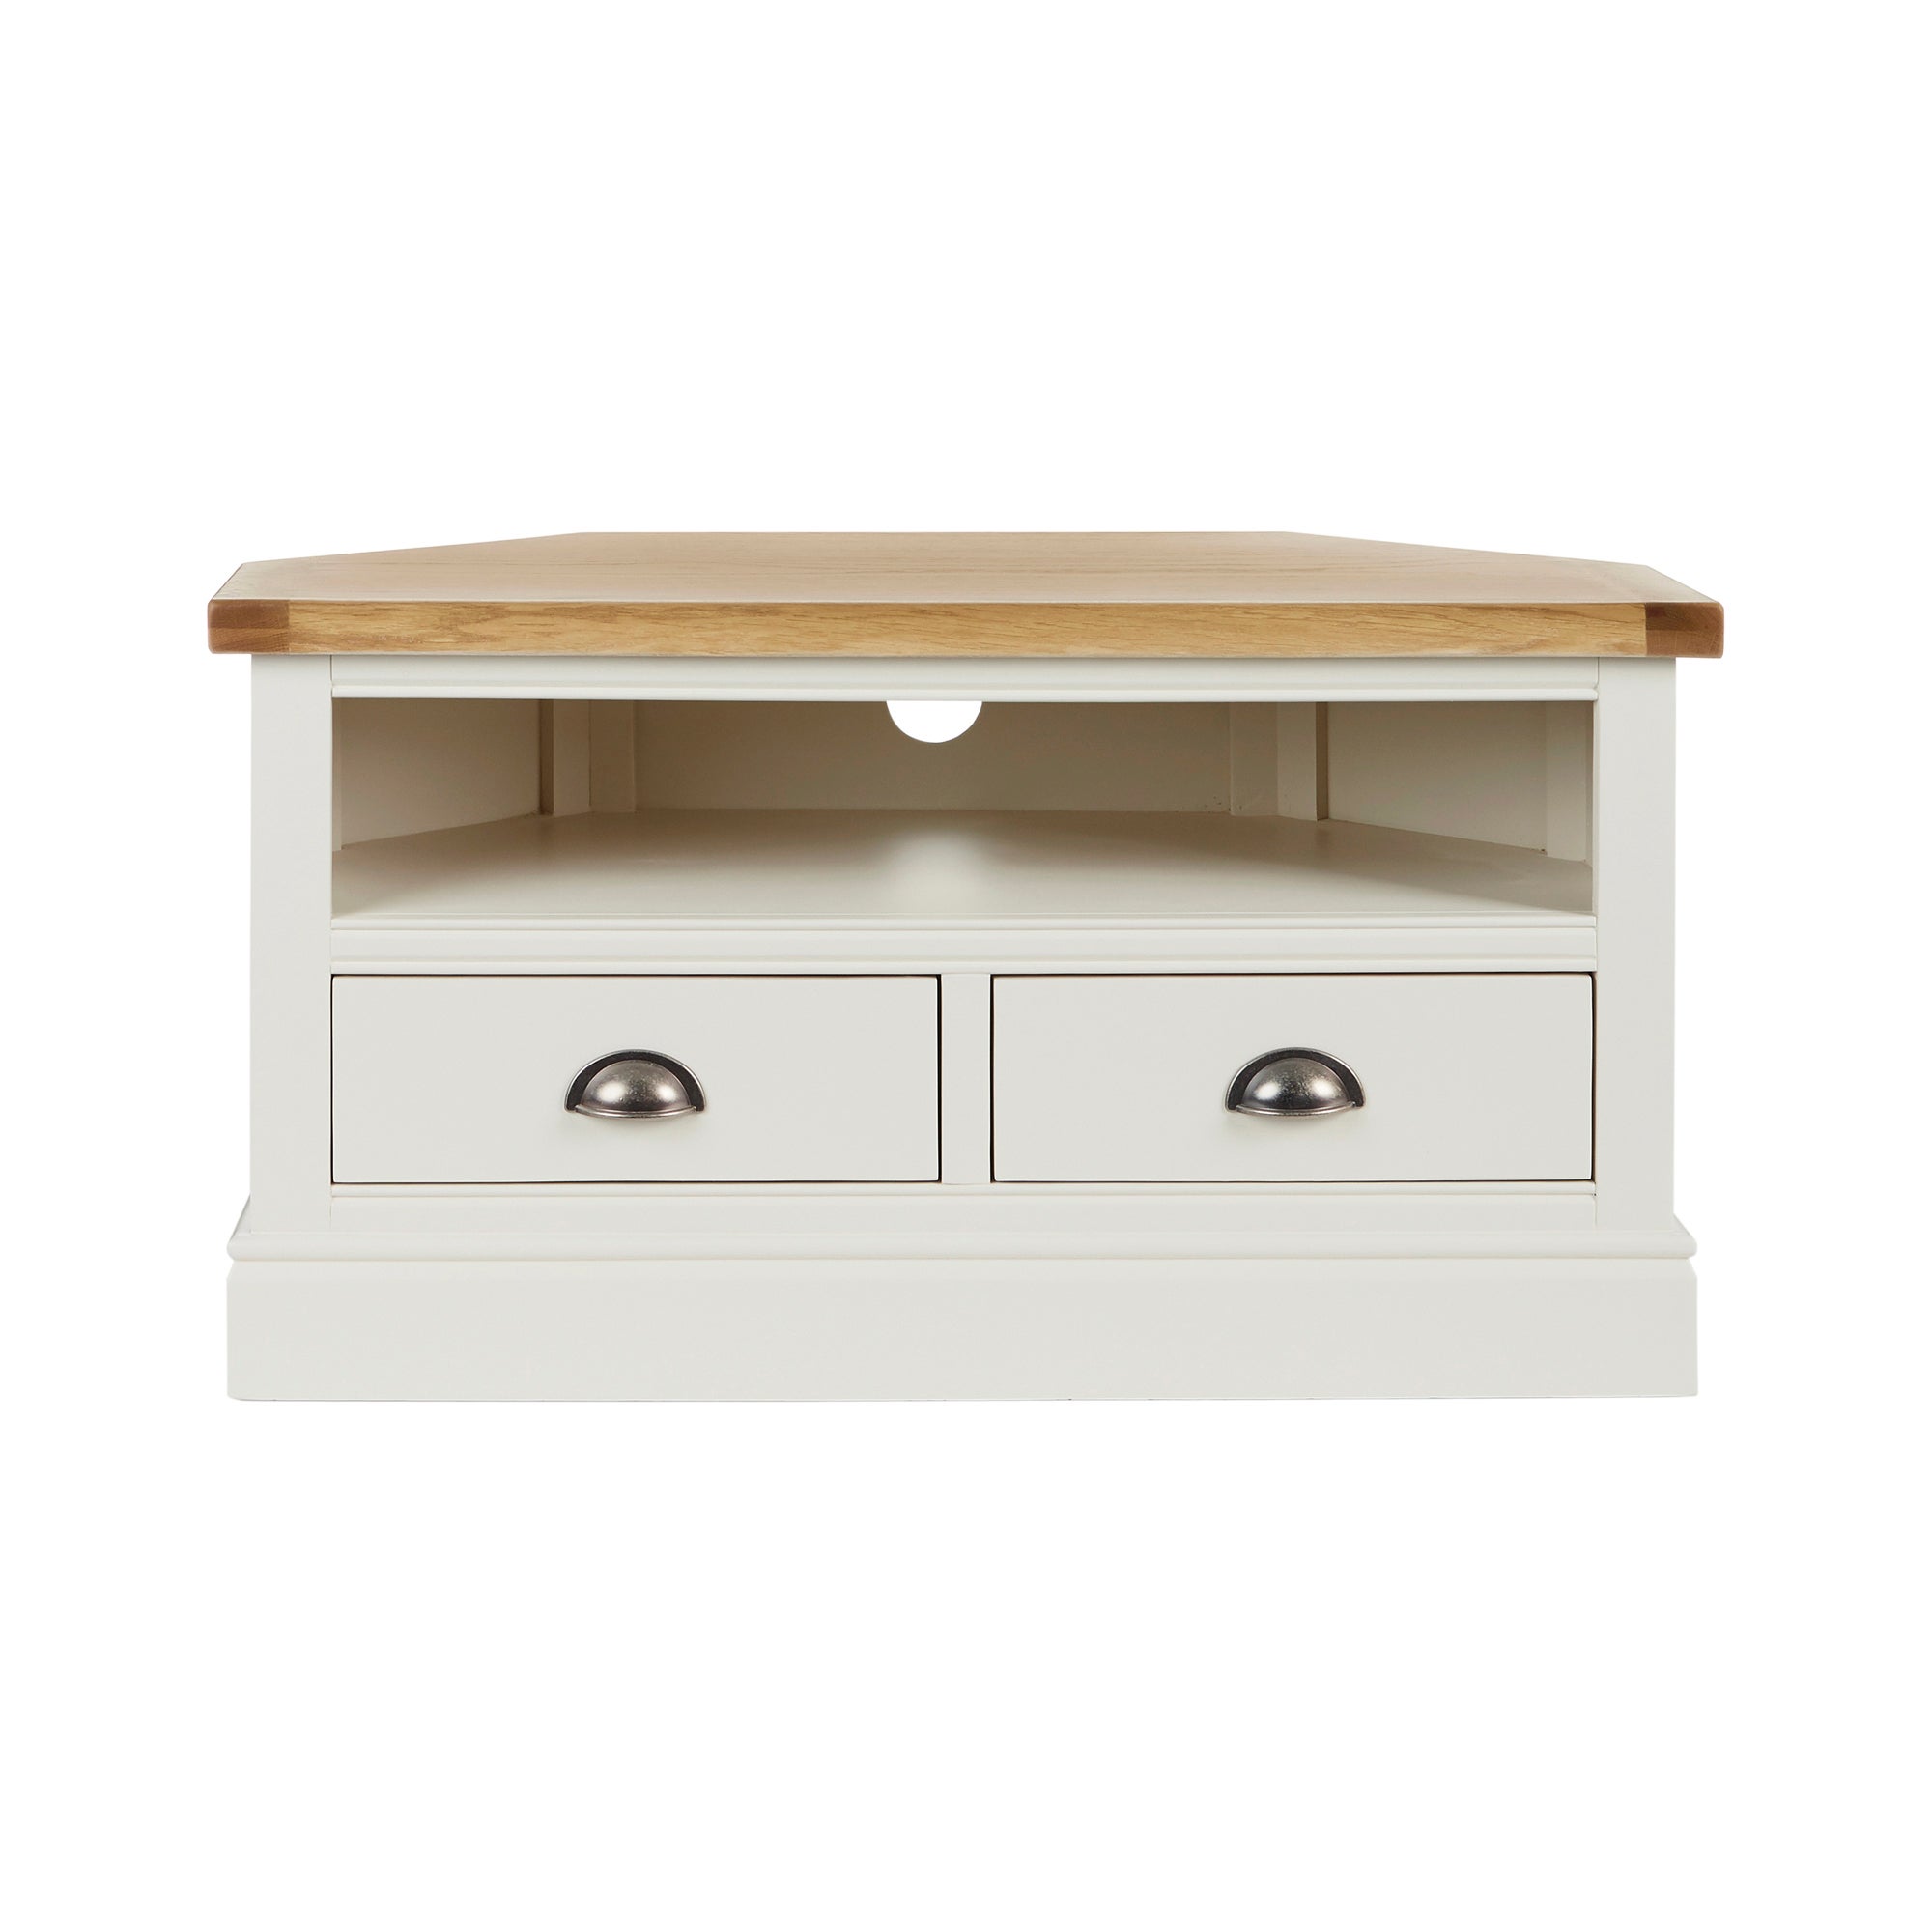 Compton Corner TV Unit, Ivory and Oak for TVs up to 42"